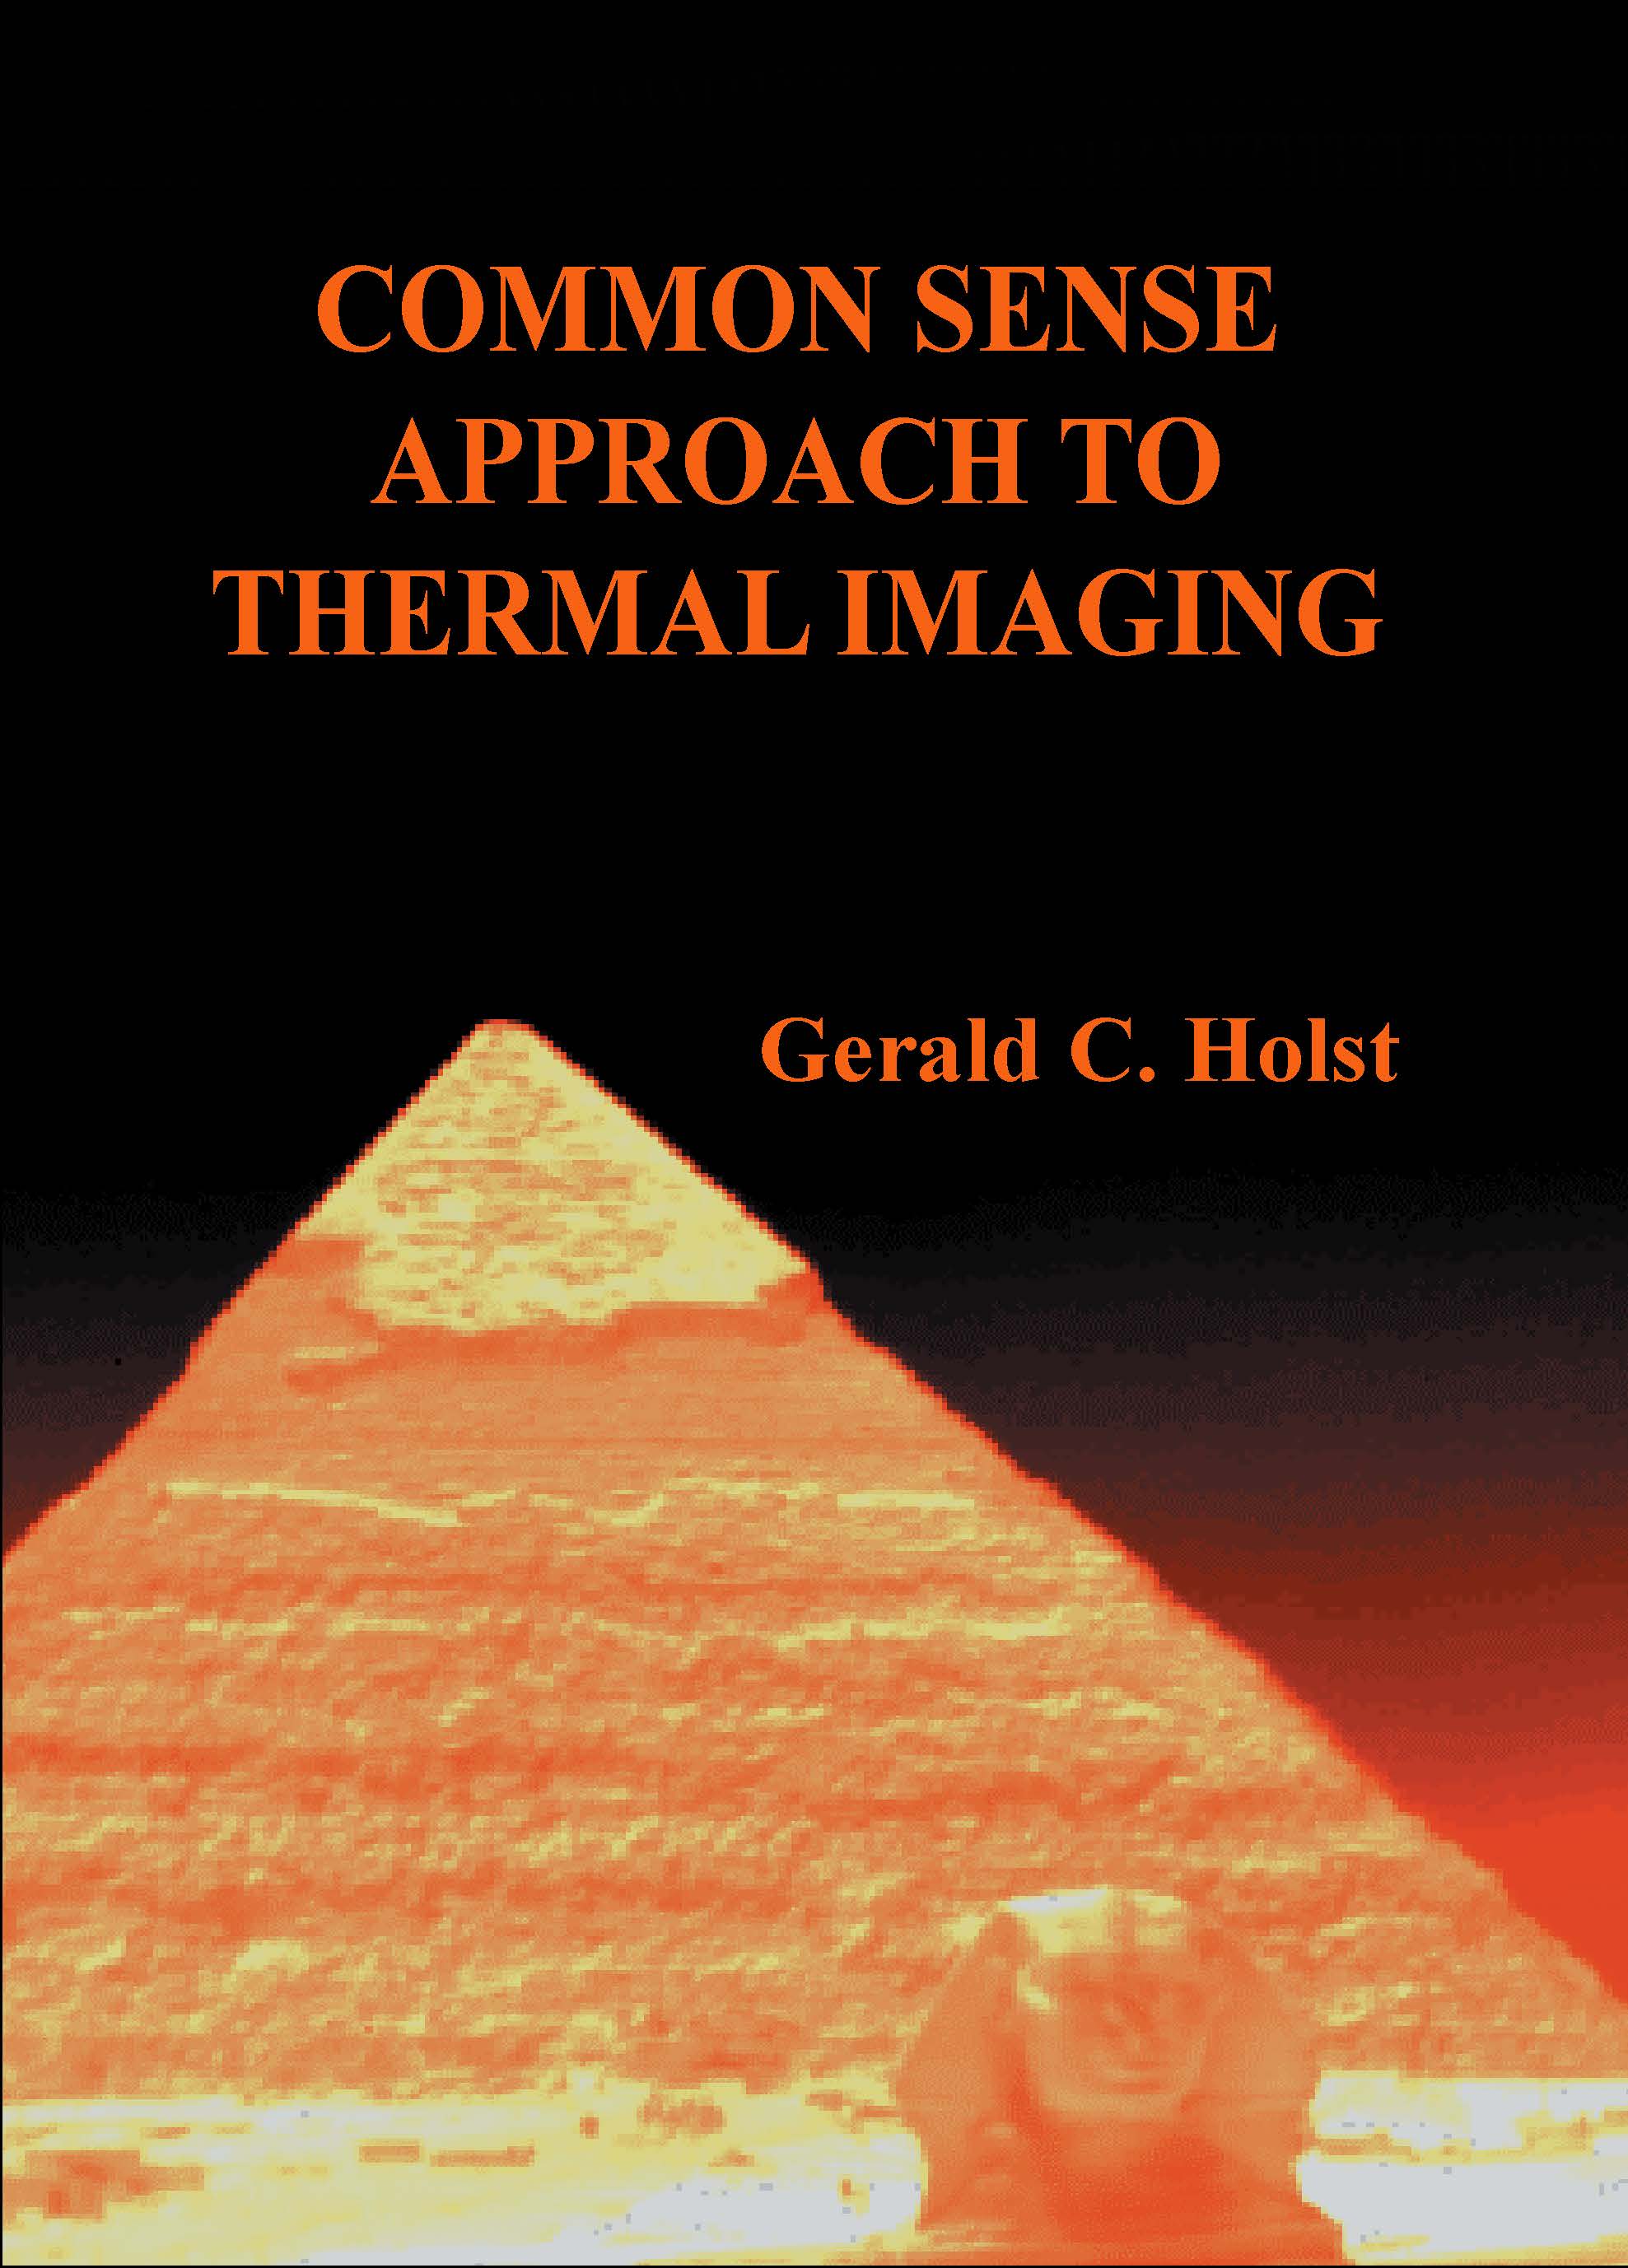 Common Sense Approach to Thermal Imaging